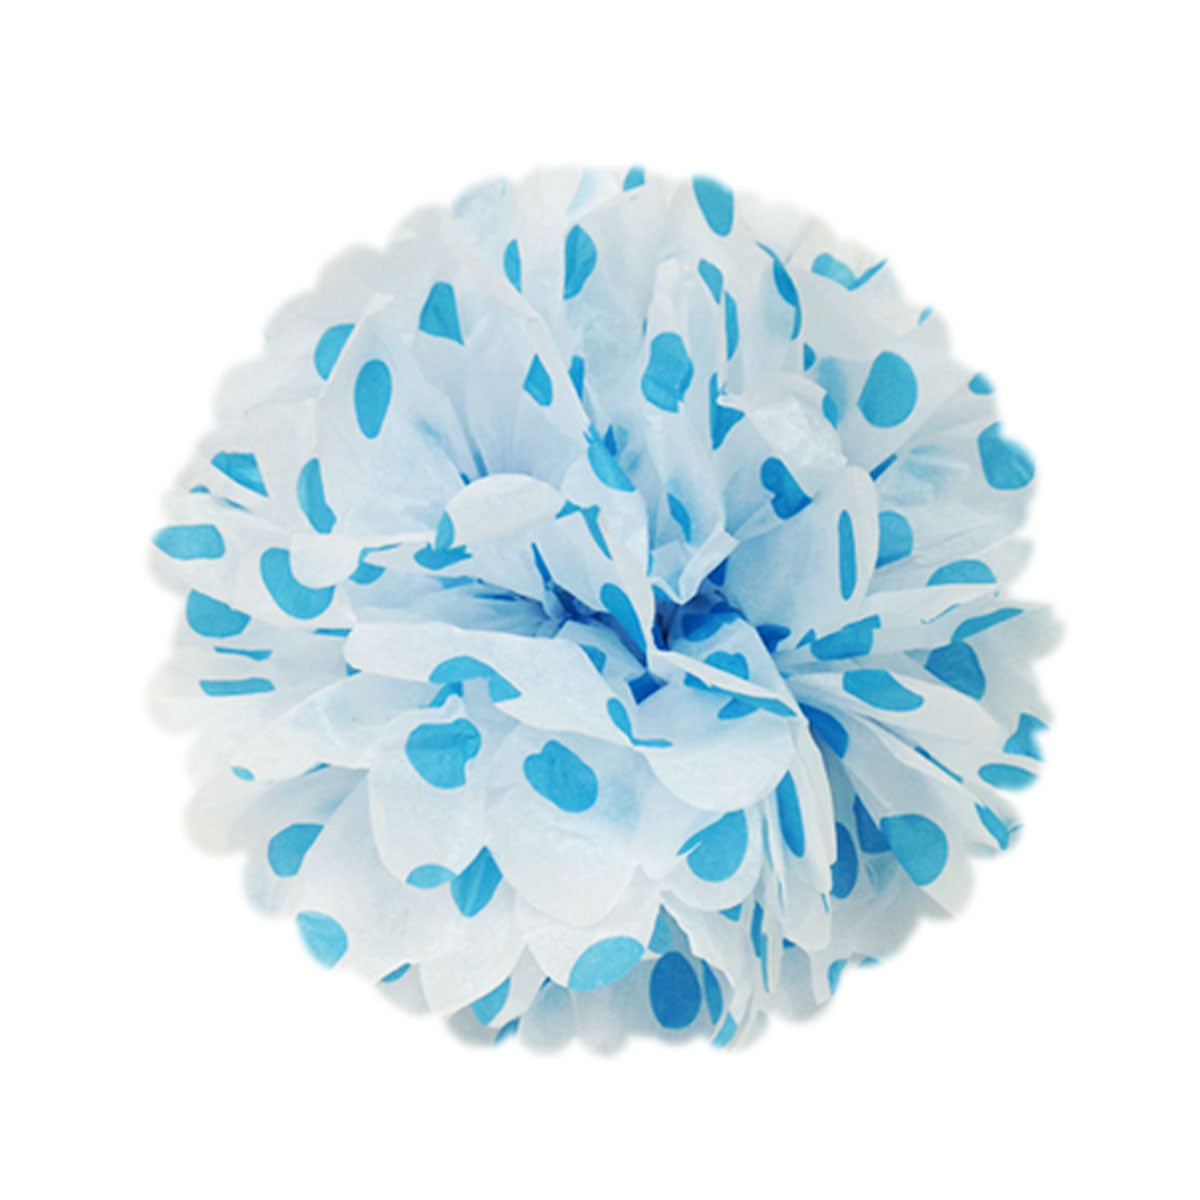 Wrapables Tissue Pom Poms Party Decorations for Weddings, Birthday Parties and Baby Showers, 12-Inch, Blue Polka Dots, Set of 3